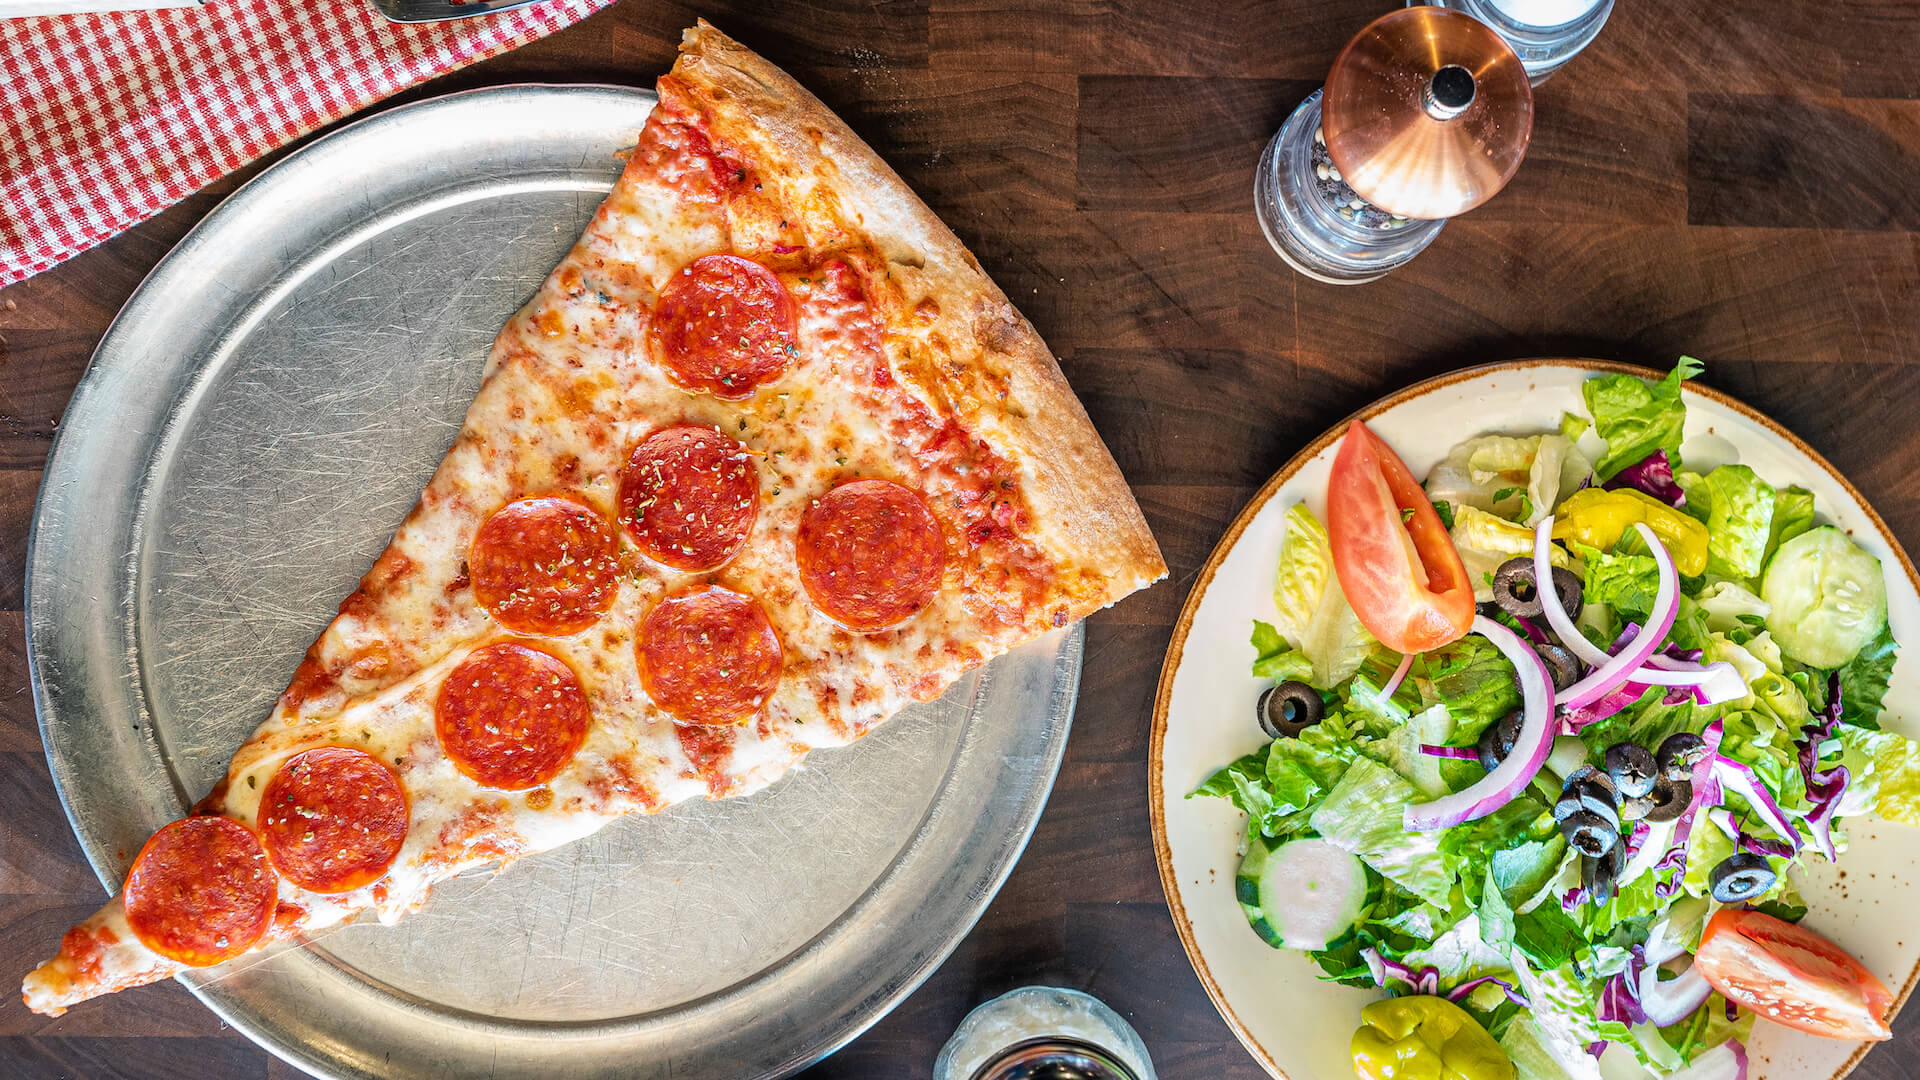 Pepperoni Giant pizza slice and side salad